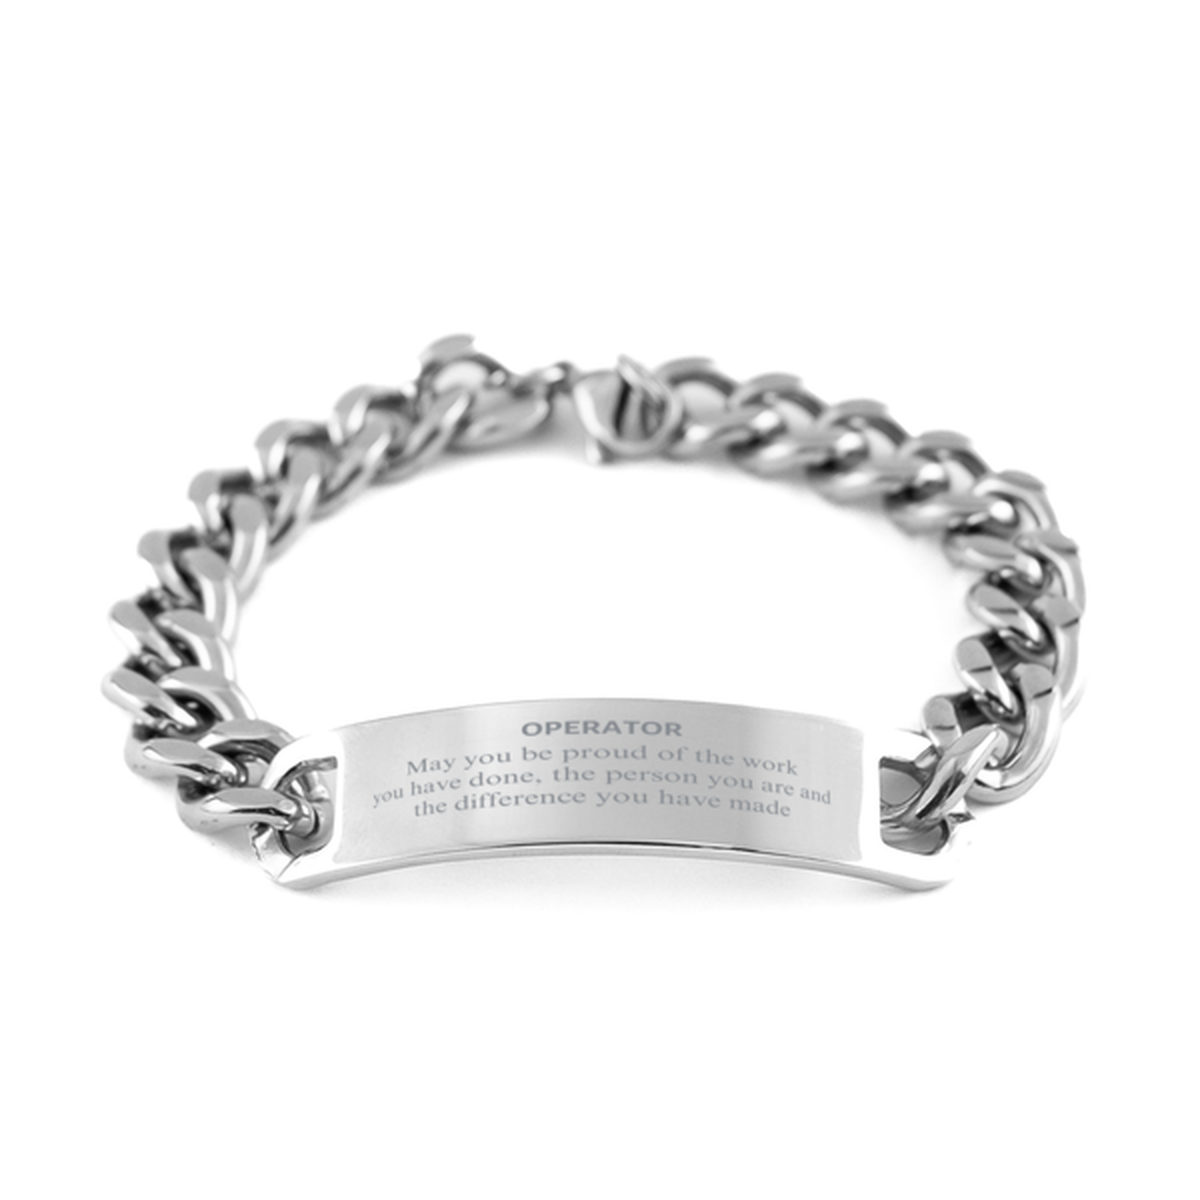 Operator May you be proud of the work you have done, Retirement Operator Cuban Chain Stainless Steel Bracelet for Colleague Appreciation Gifts Amazing for Operator